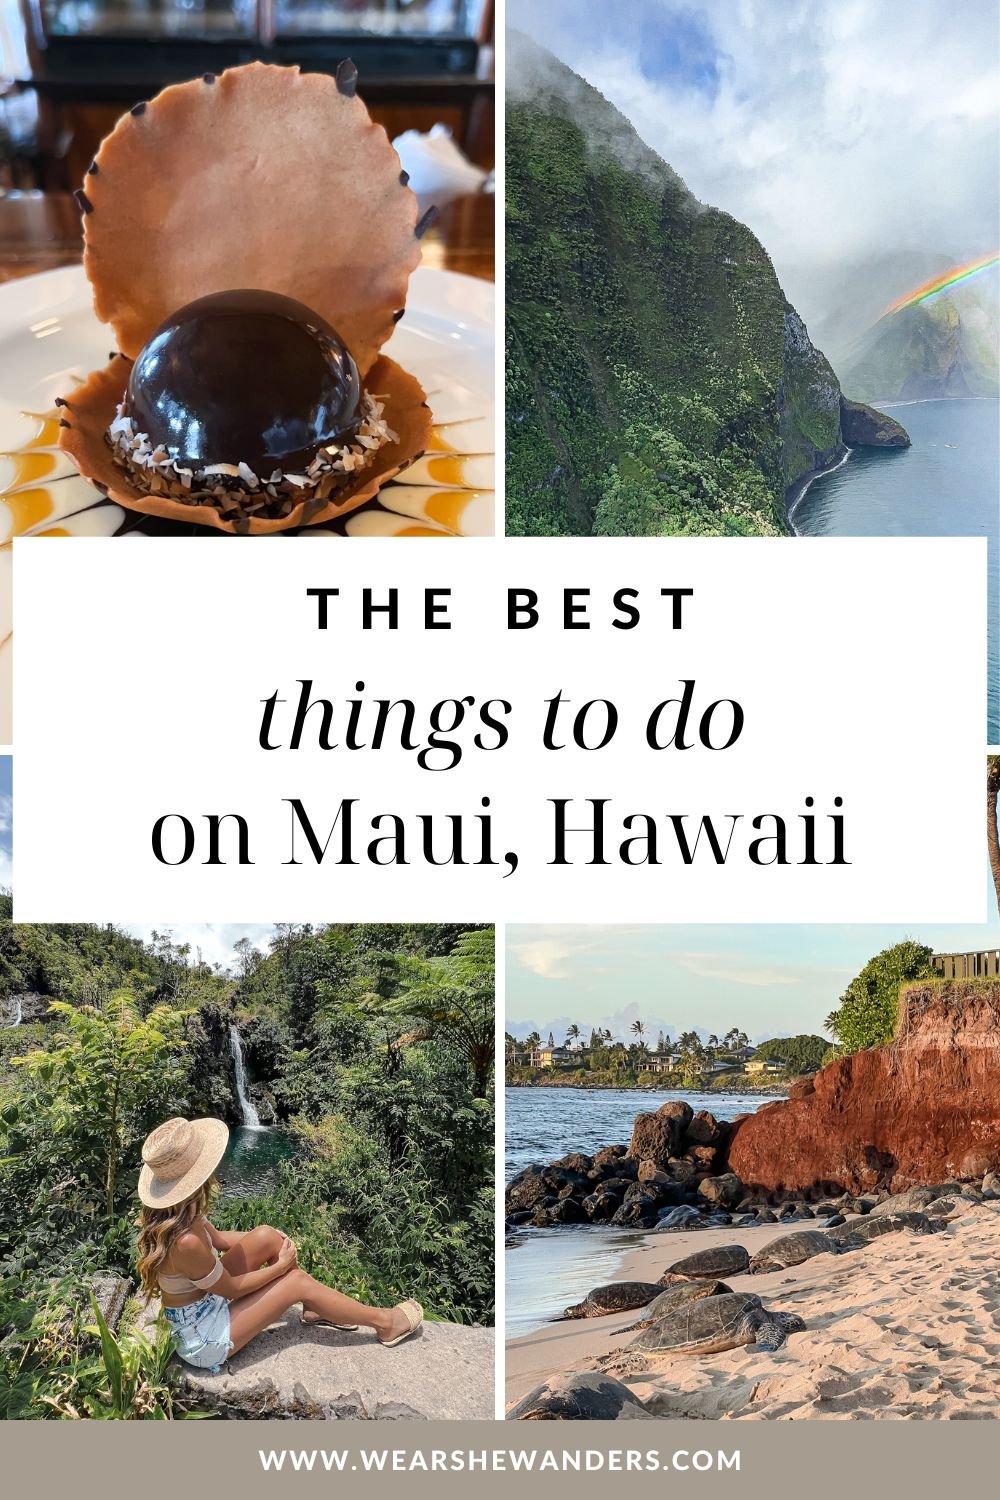 Maui Travel Guides 2023 - Which is the Best Maui Vacation Guide? - A Maui  Blog